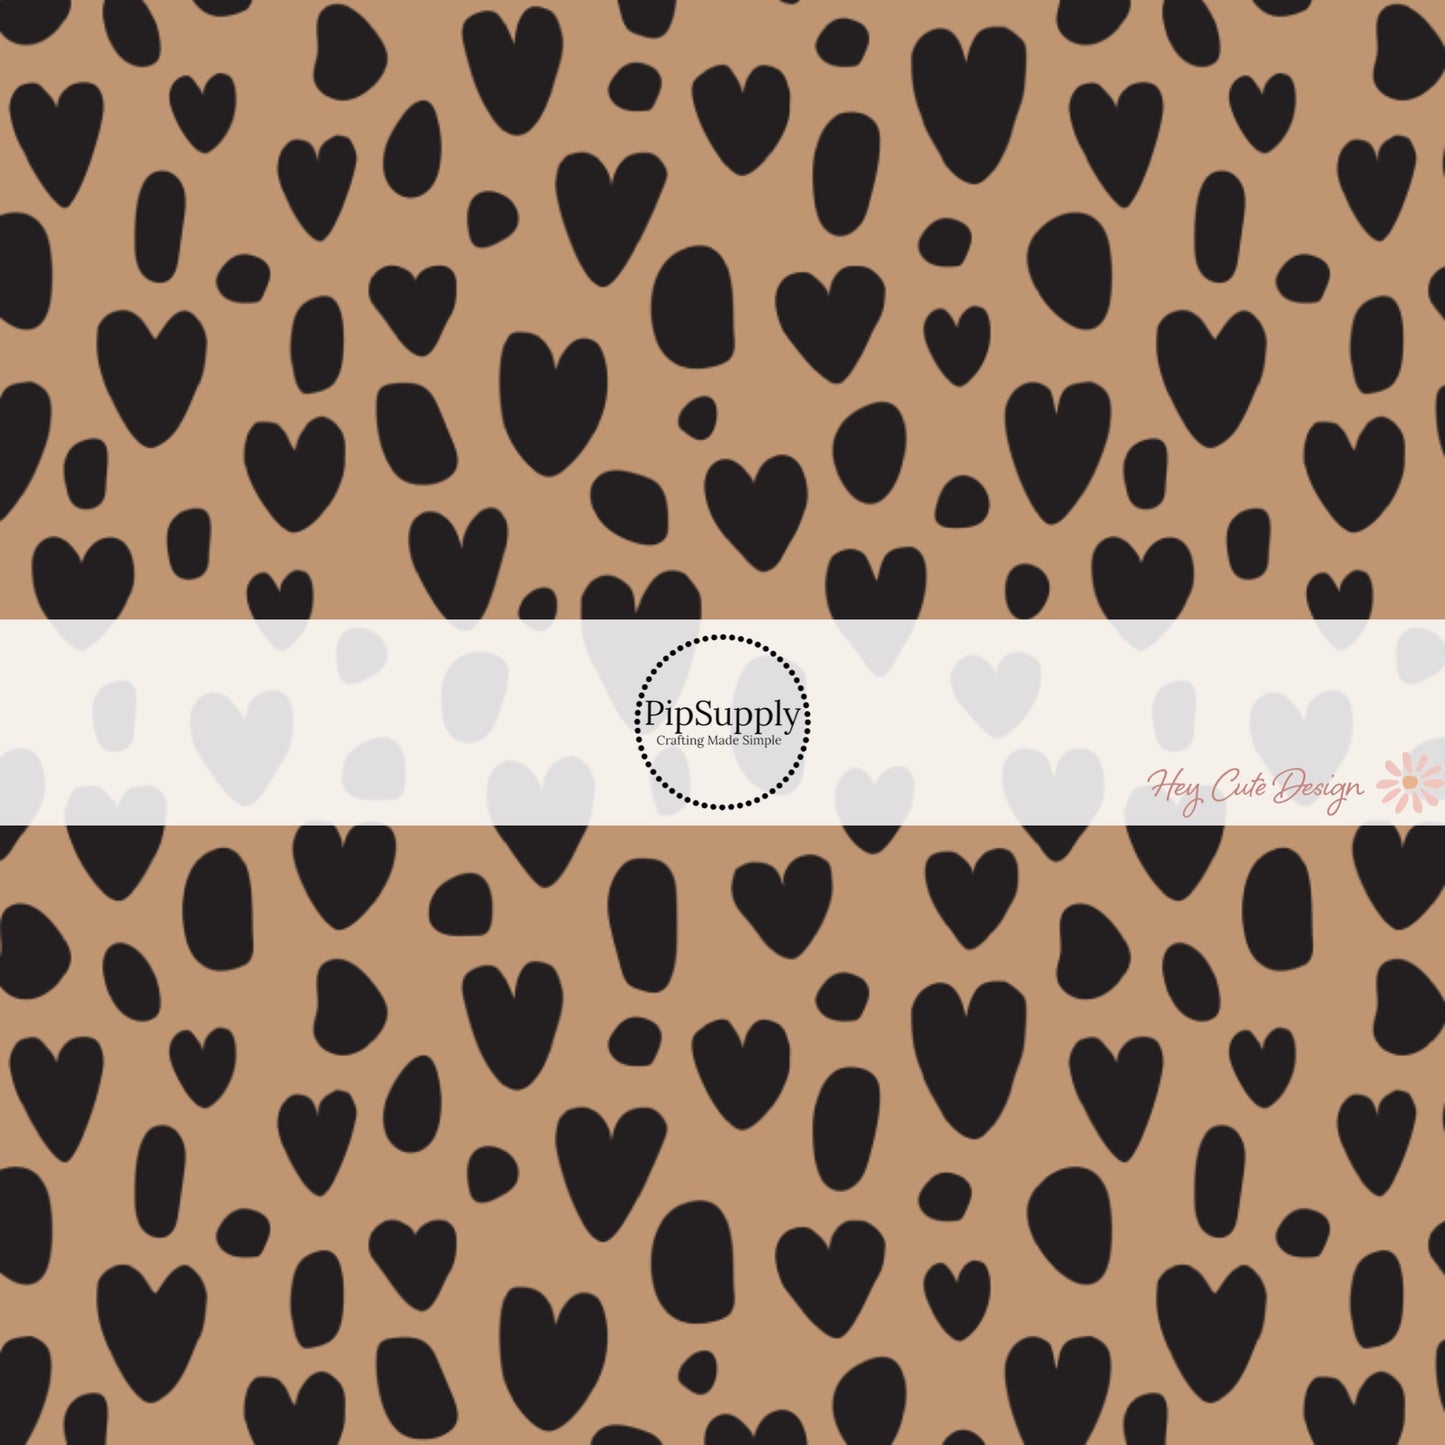 These heart and spot themed brown headband kits are easy to assemble and come with everything you need to make your own knotted headband. These fun animal themed kits with a variety hearts and spots in black on brown include a custom printed and sewn fabric strip and a coordinating velvet headband.  